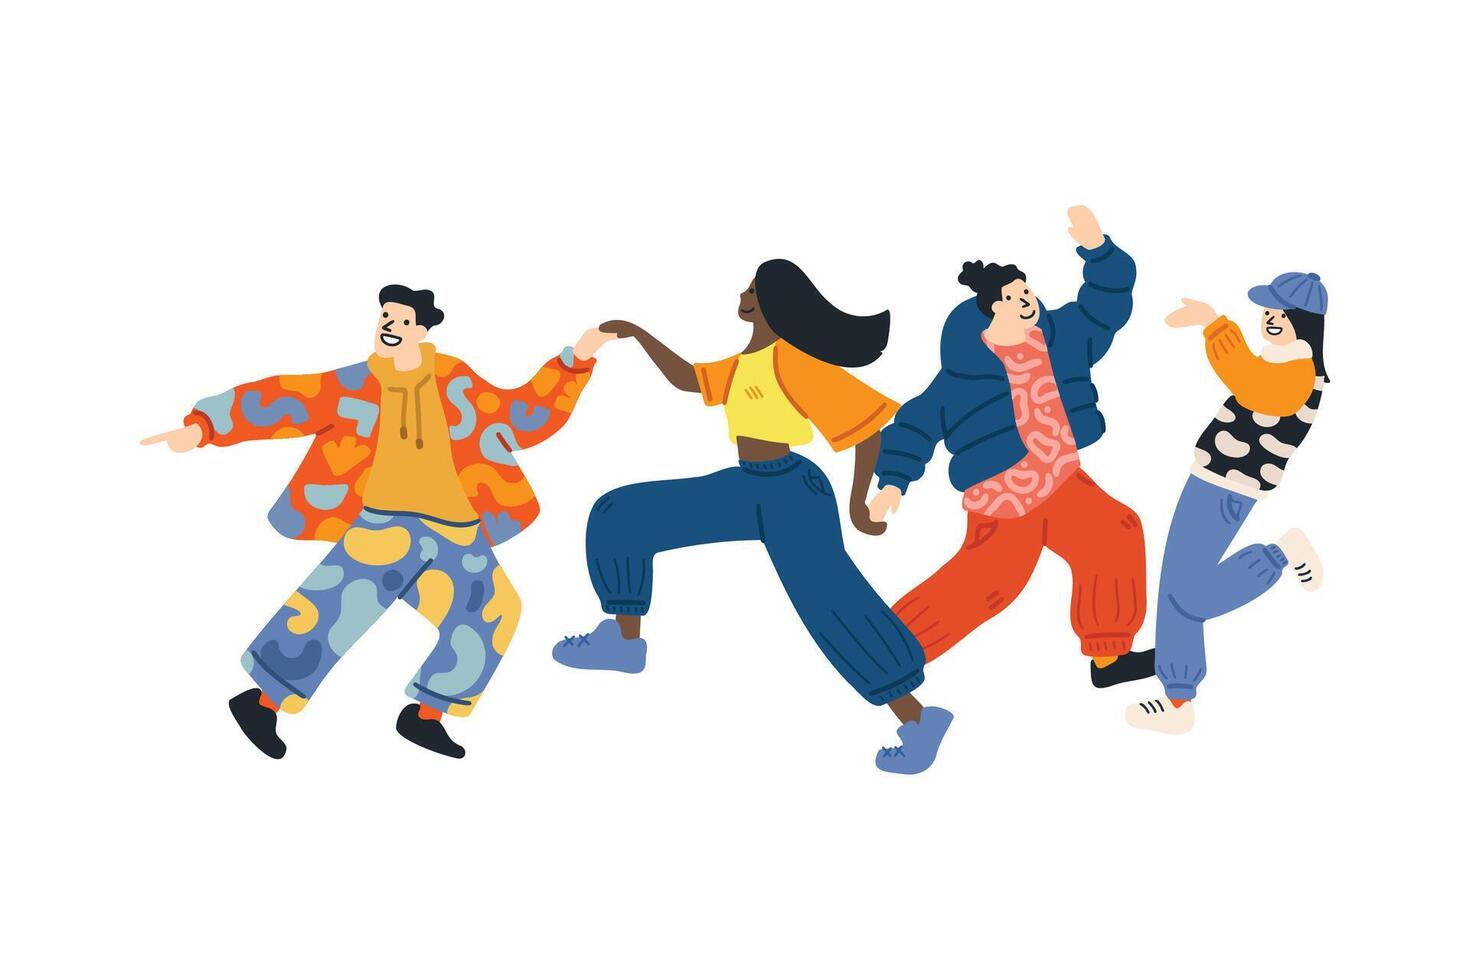 a group of people dancing together flat illustration style vector